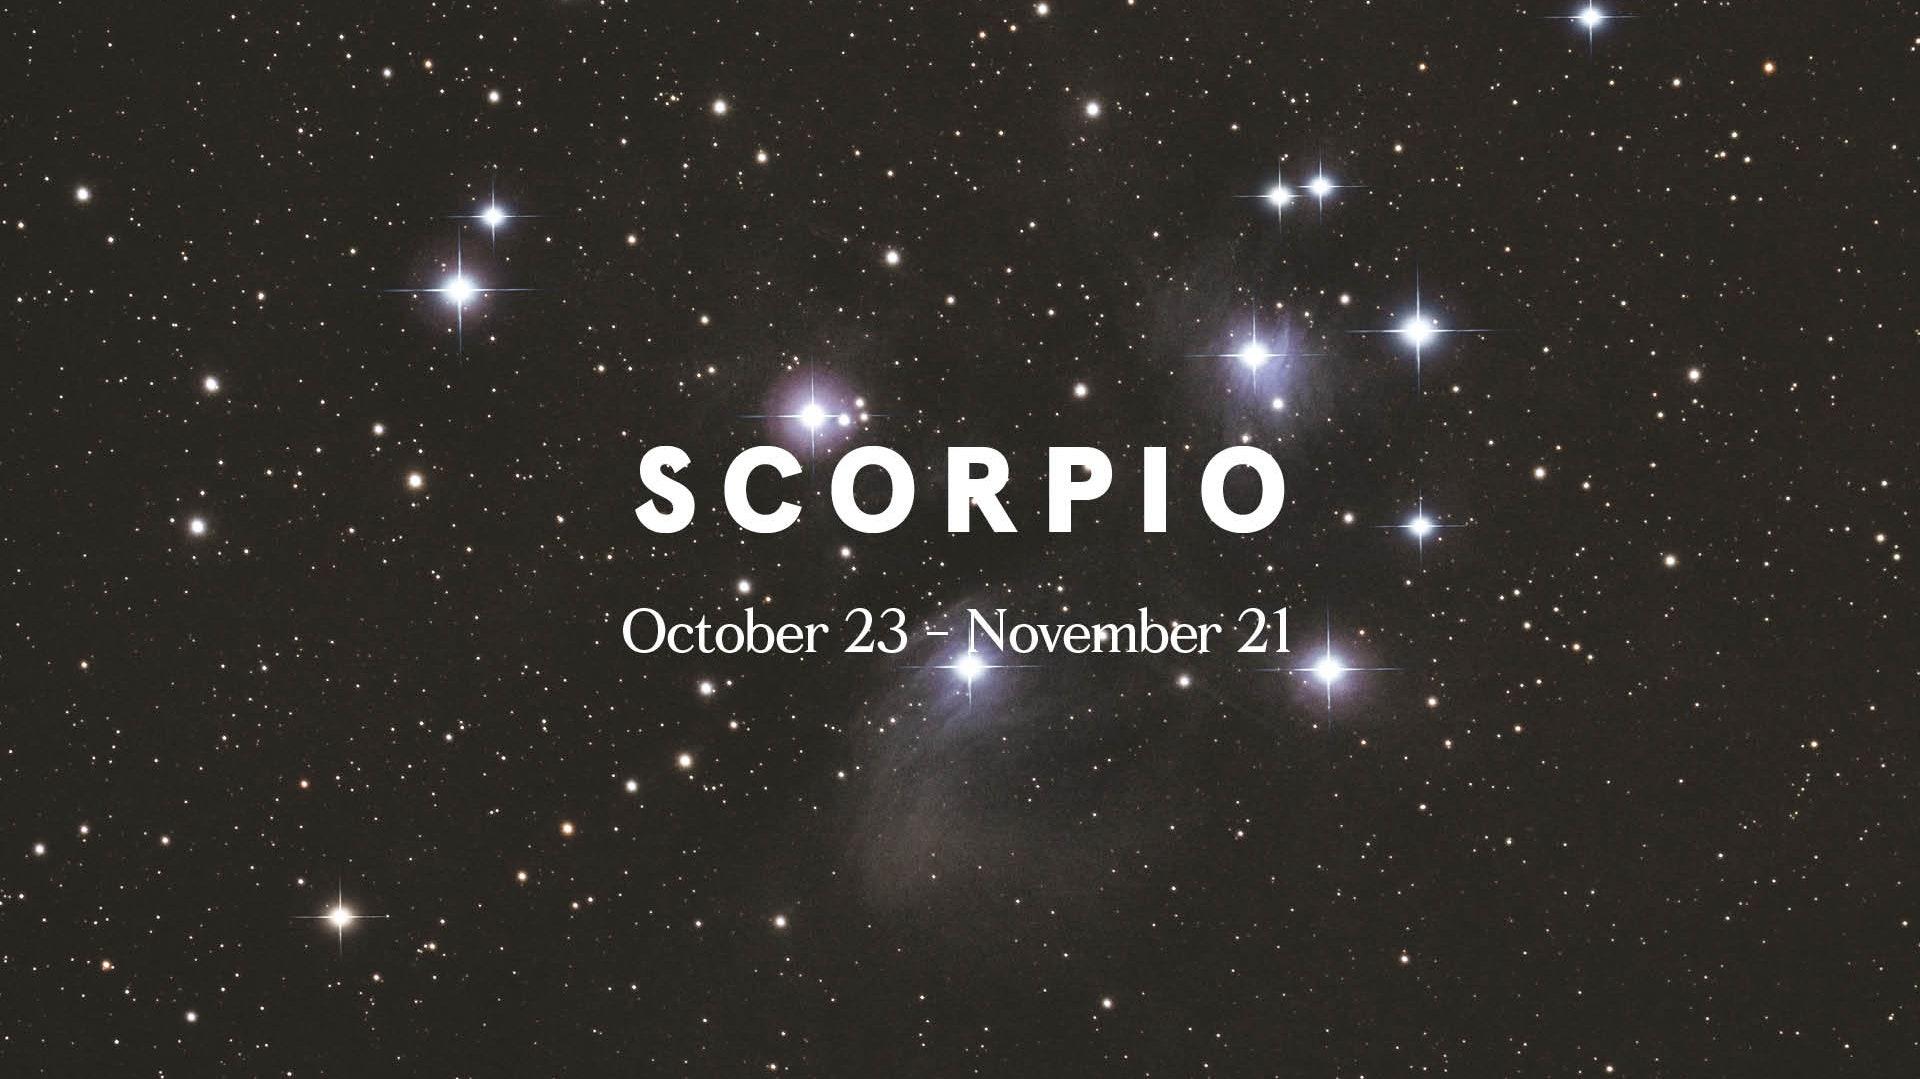 Scorpio Season Is Scary In A Good Way What To Expect Based On